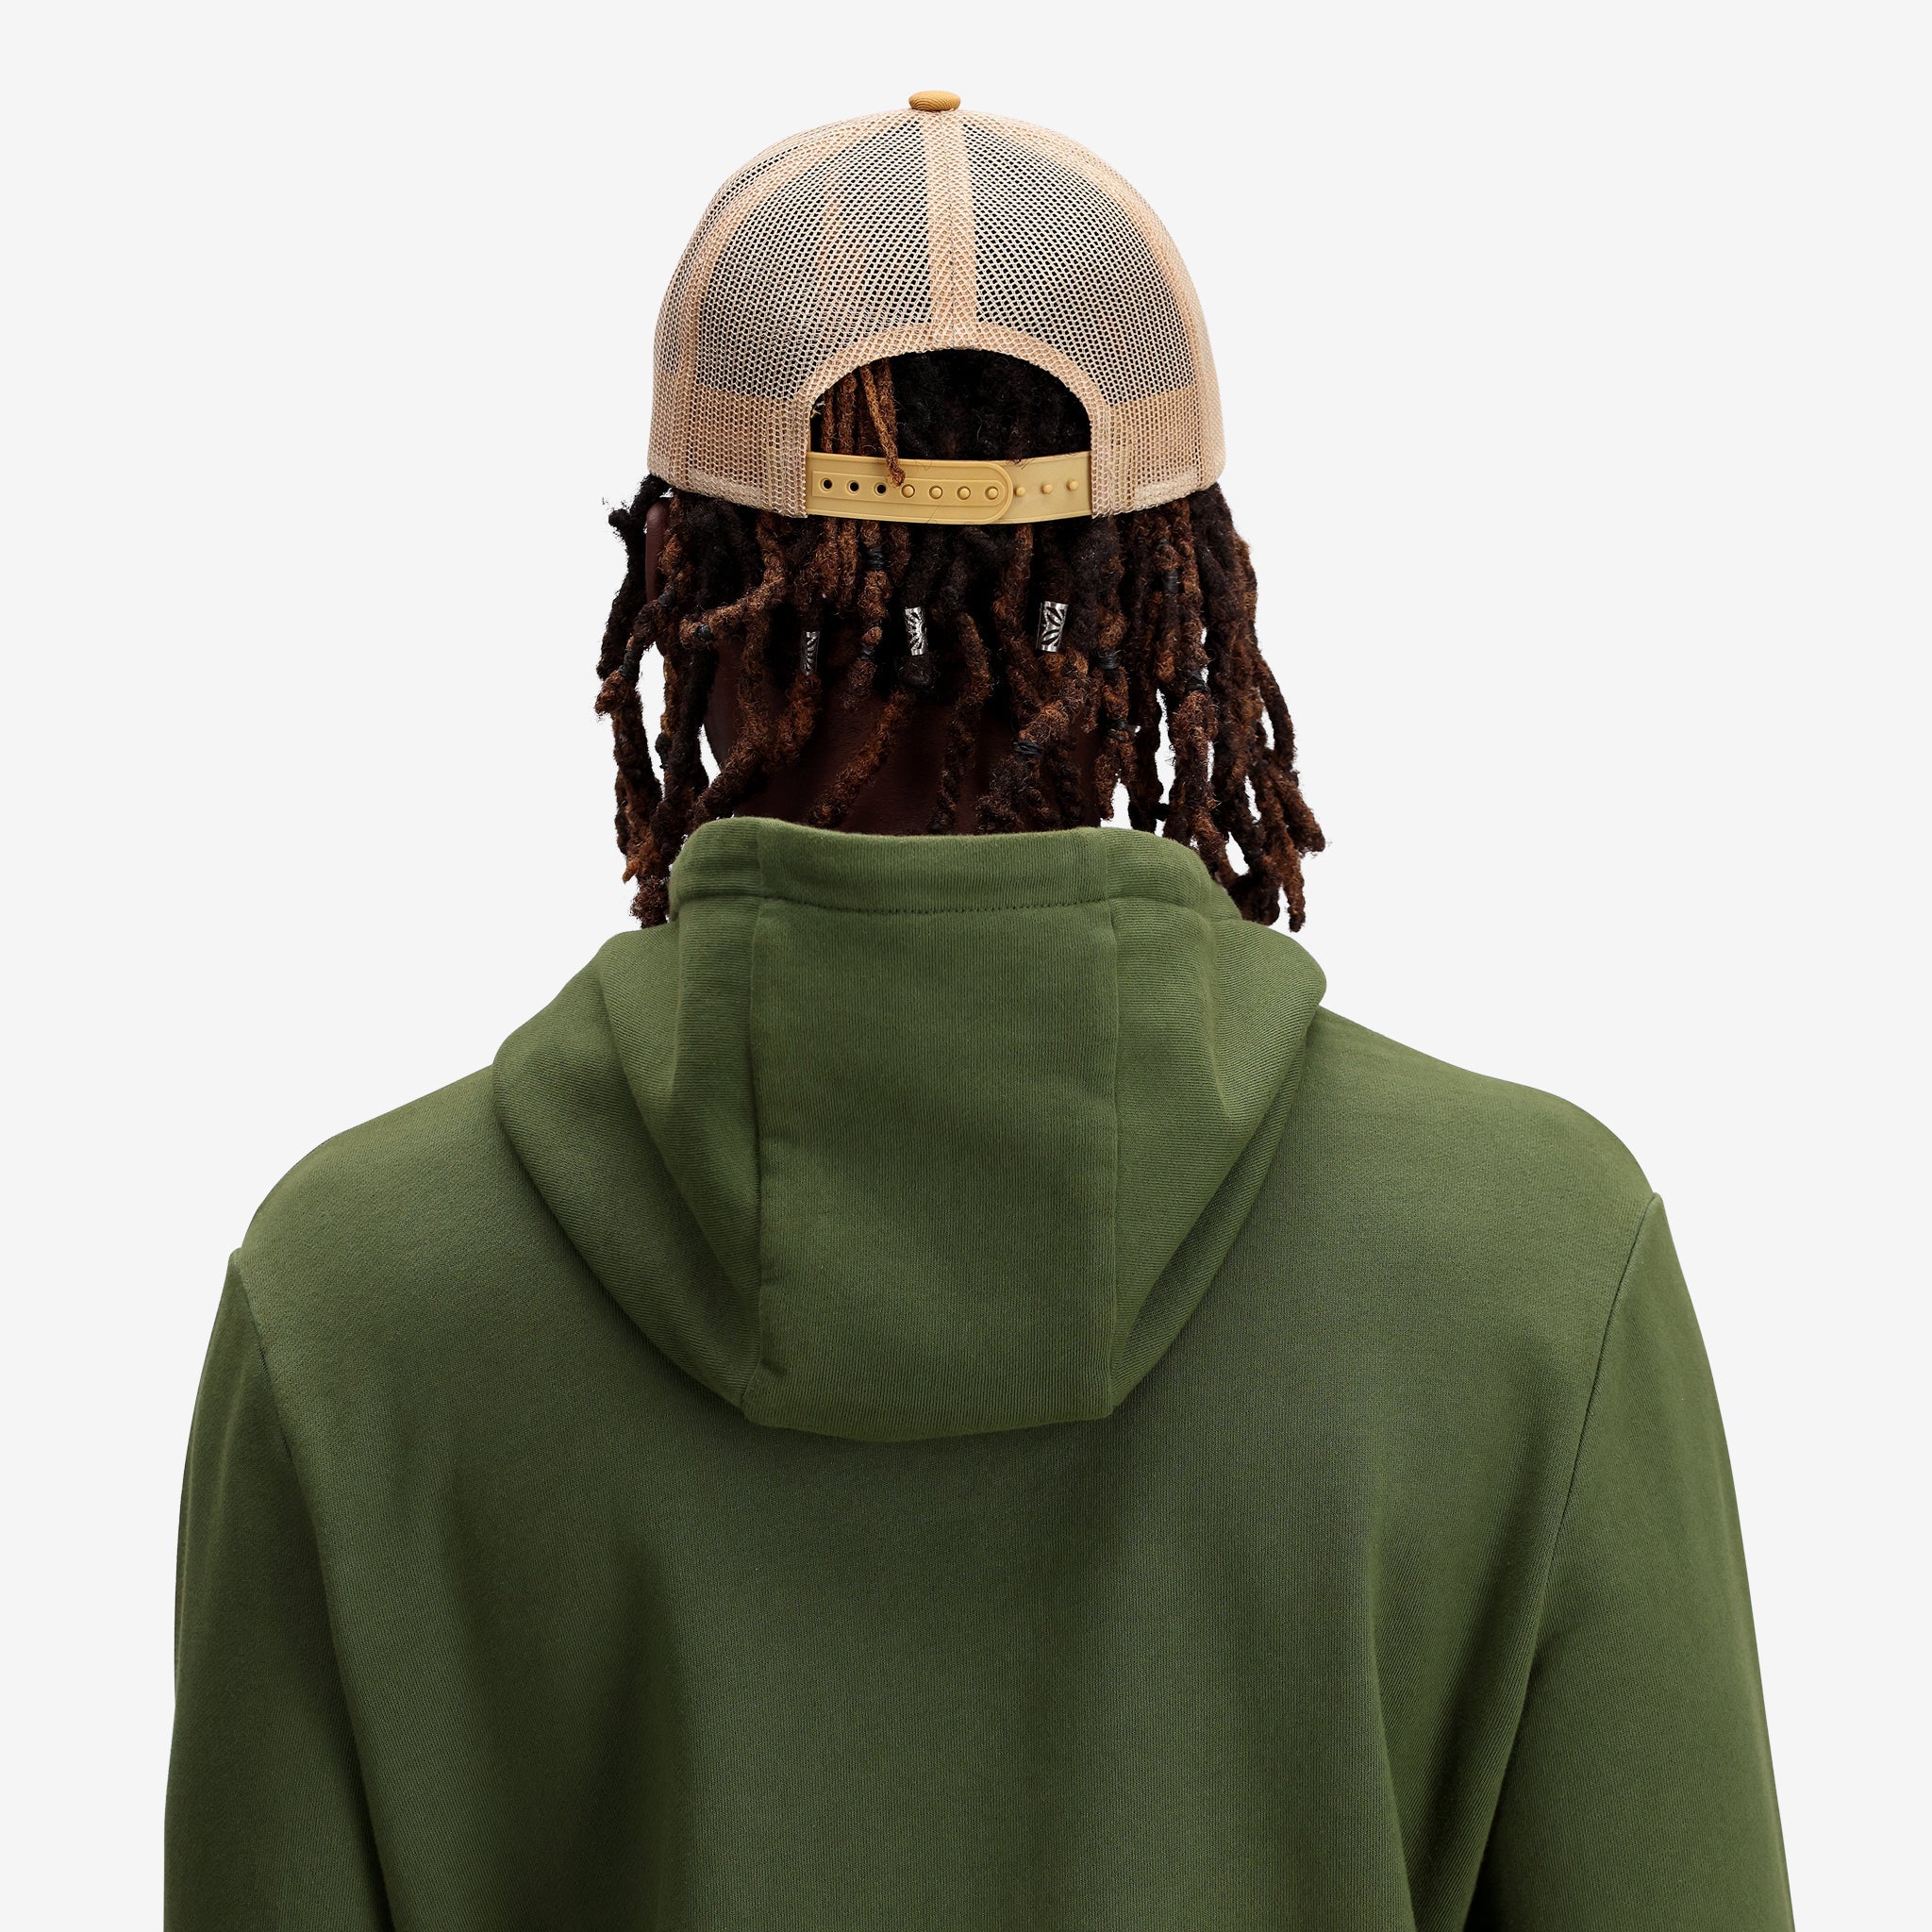 General shot Topo Designs Trucker Hat with mesh back and original logo patch in "Khaki".